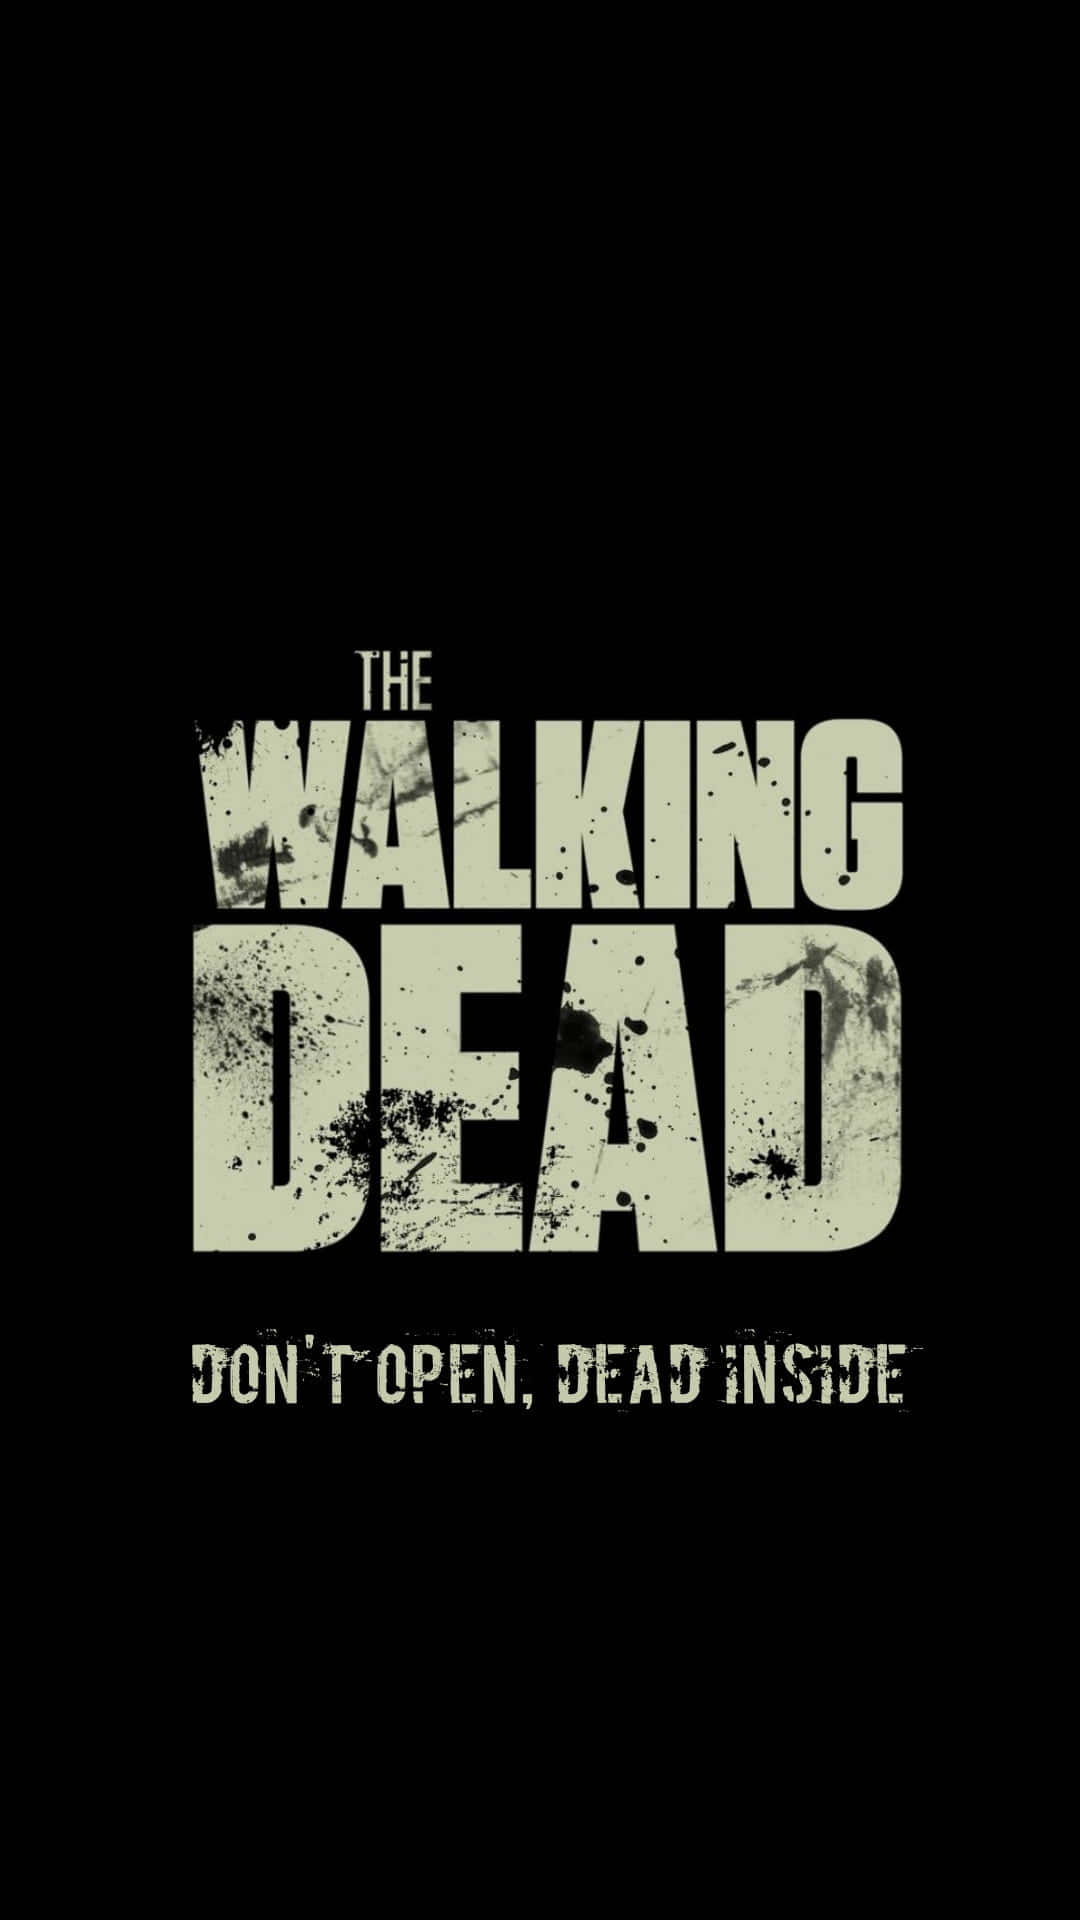 Experience a post apocalypse world with the The Walking Dead on your Iphone Wallpaper